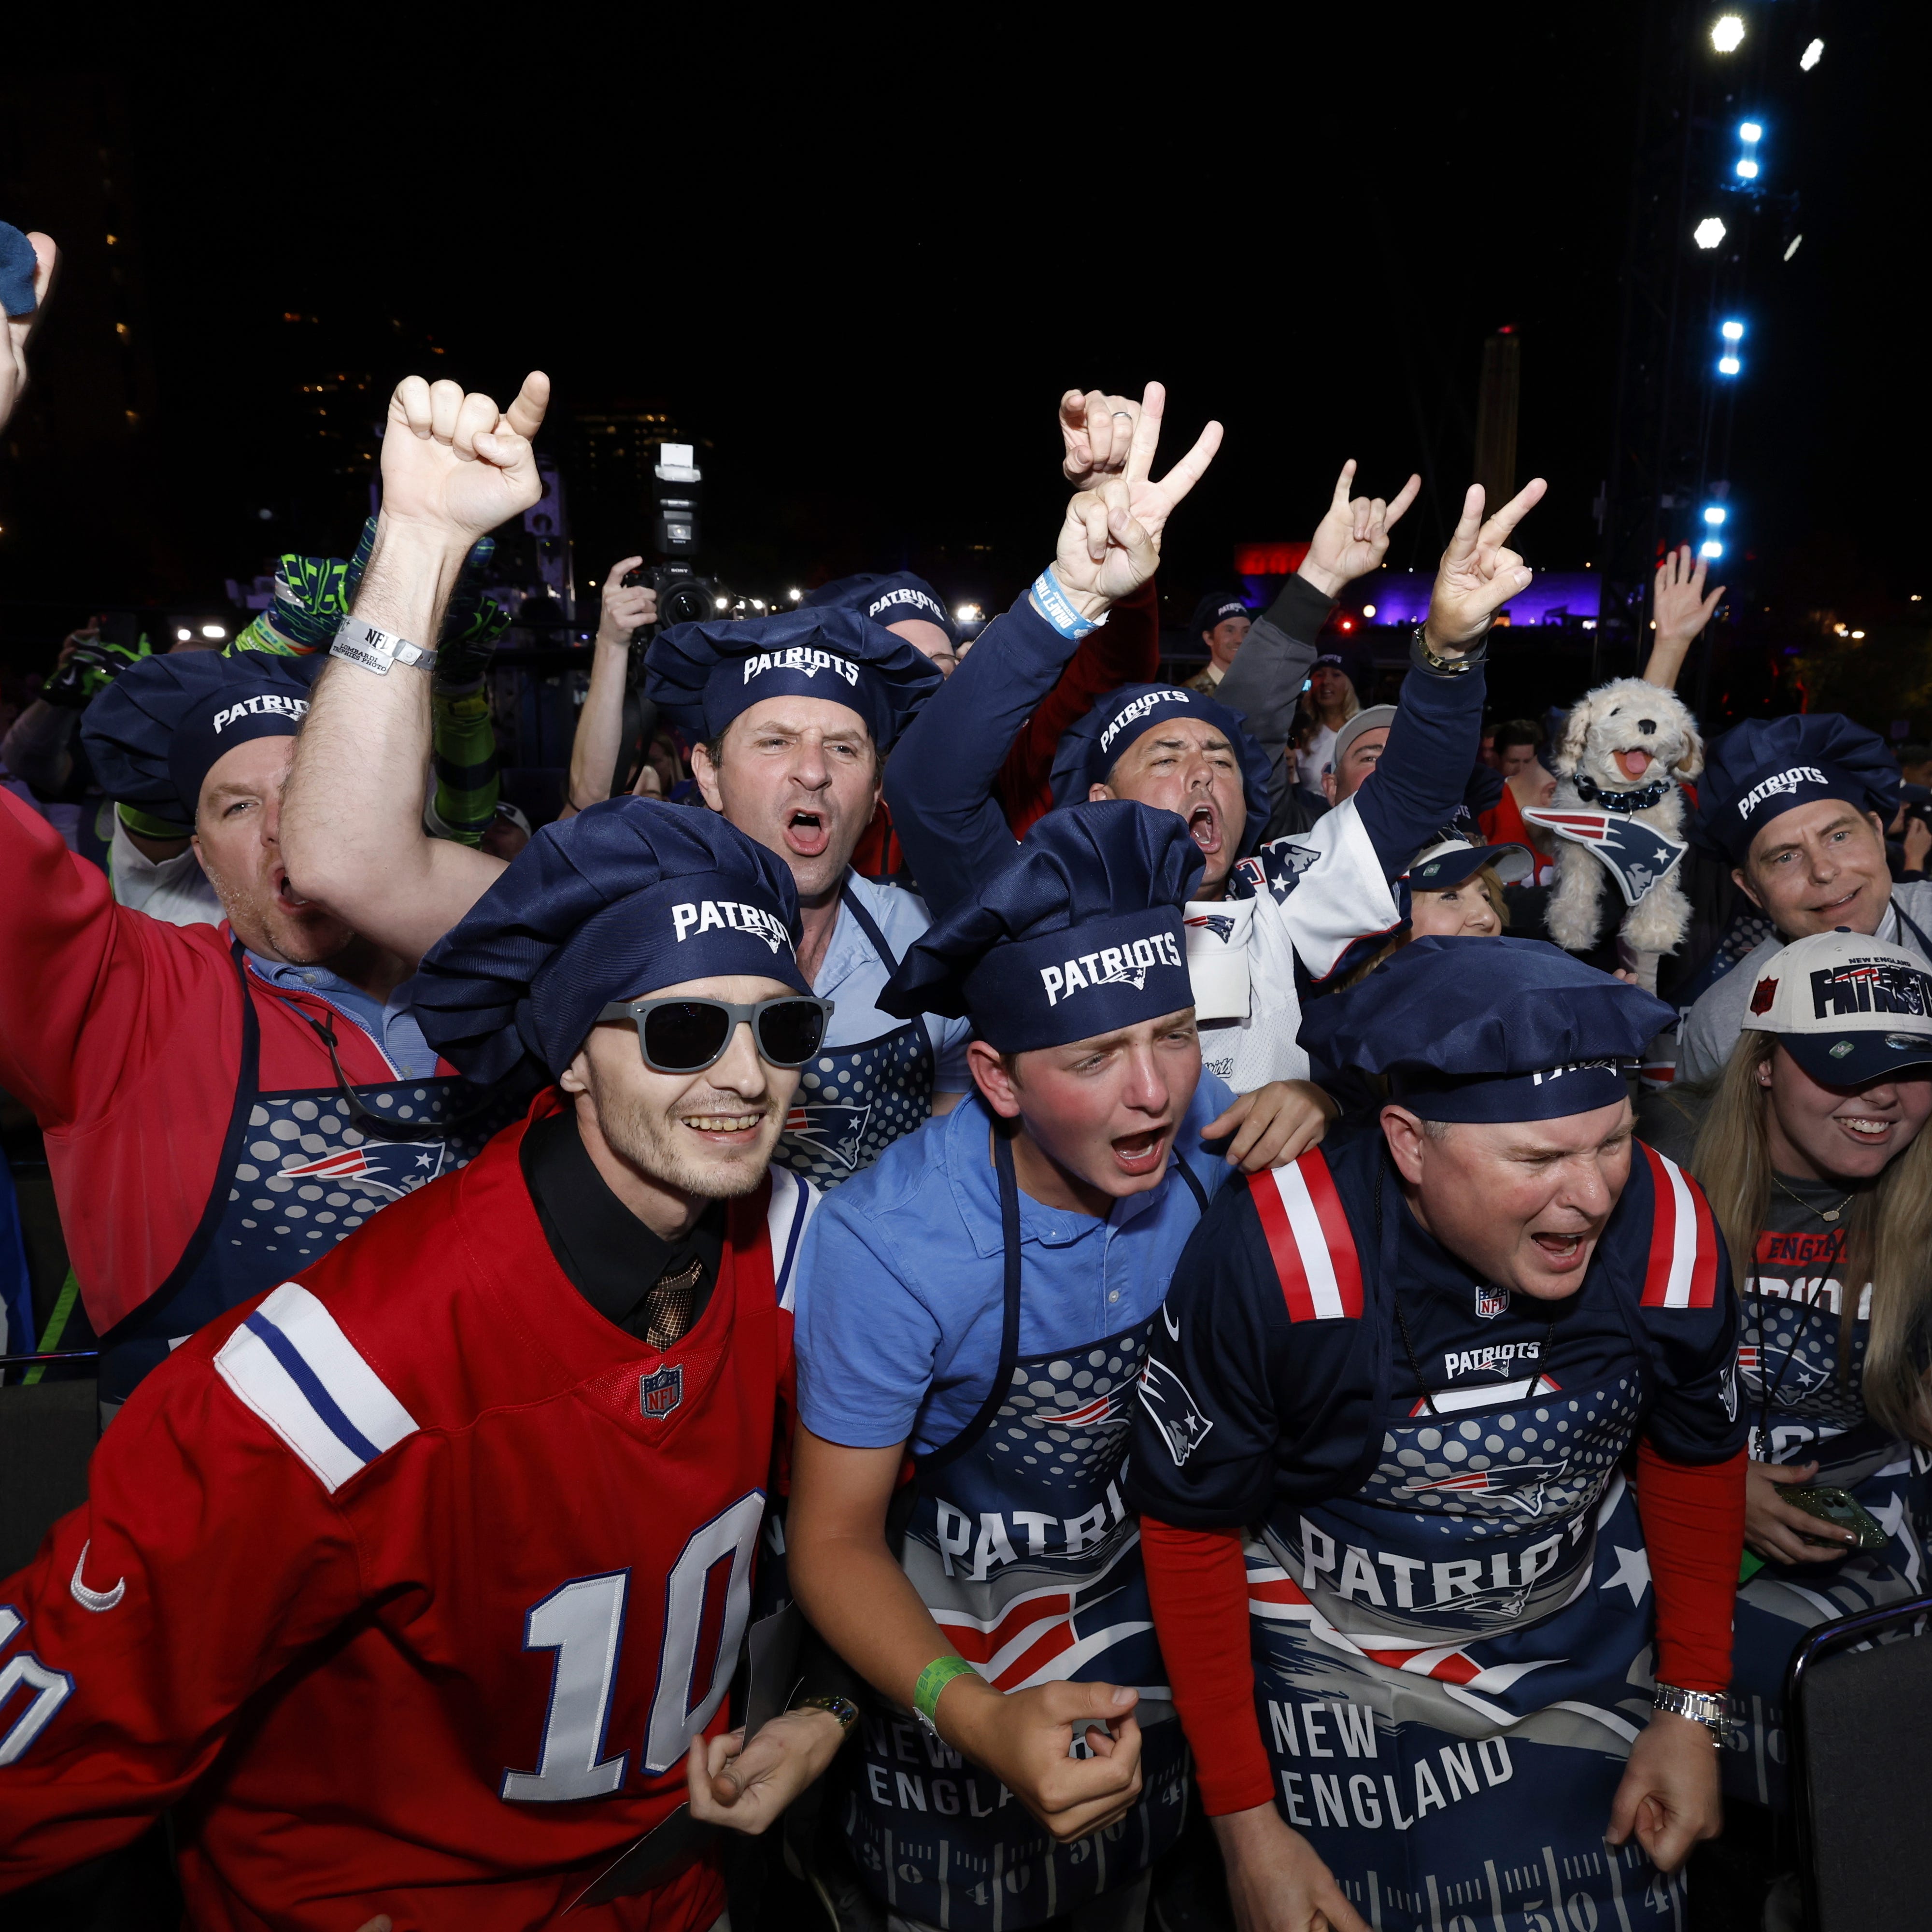 New England Patriots fans are seen at the 2023 NFL Draft on Thursday, April 27, 2023 in Kansas City, MO.